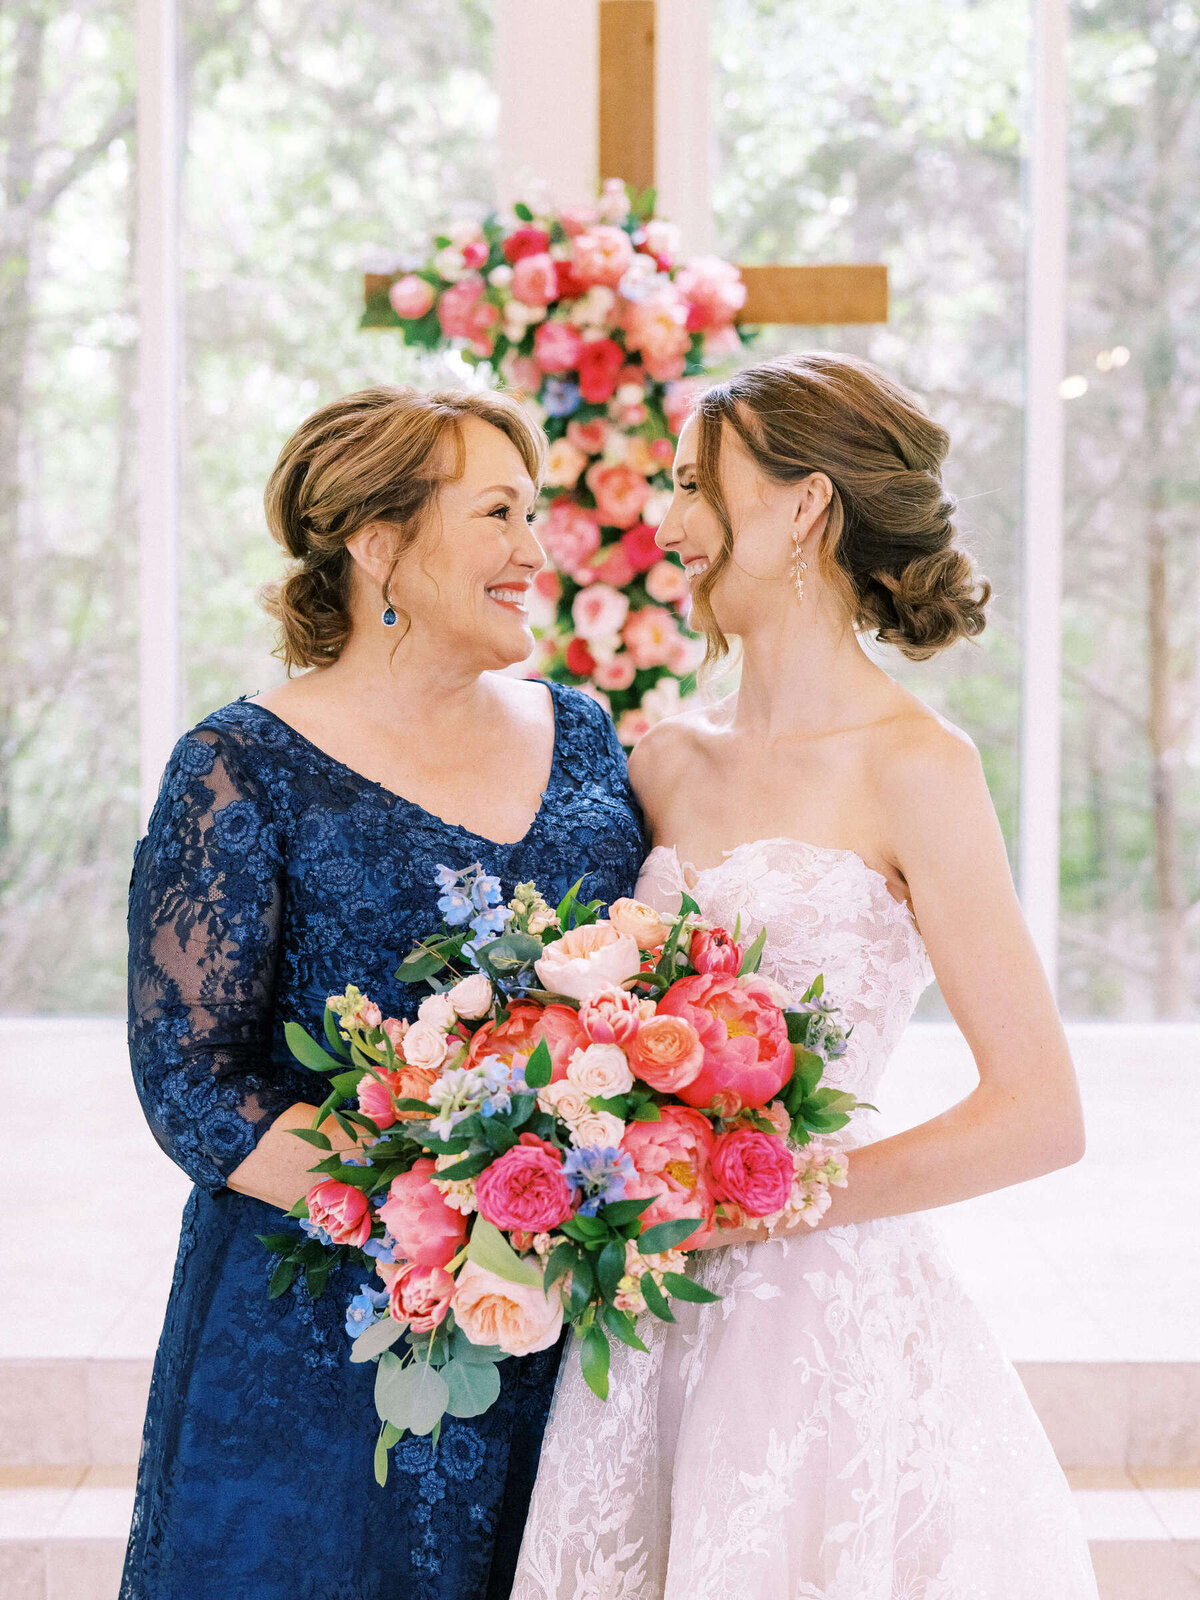 Mother of the bride and bride in lace dresses smile at each other at colorful Ashton Gardens wedding